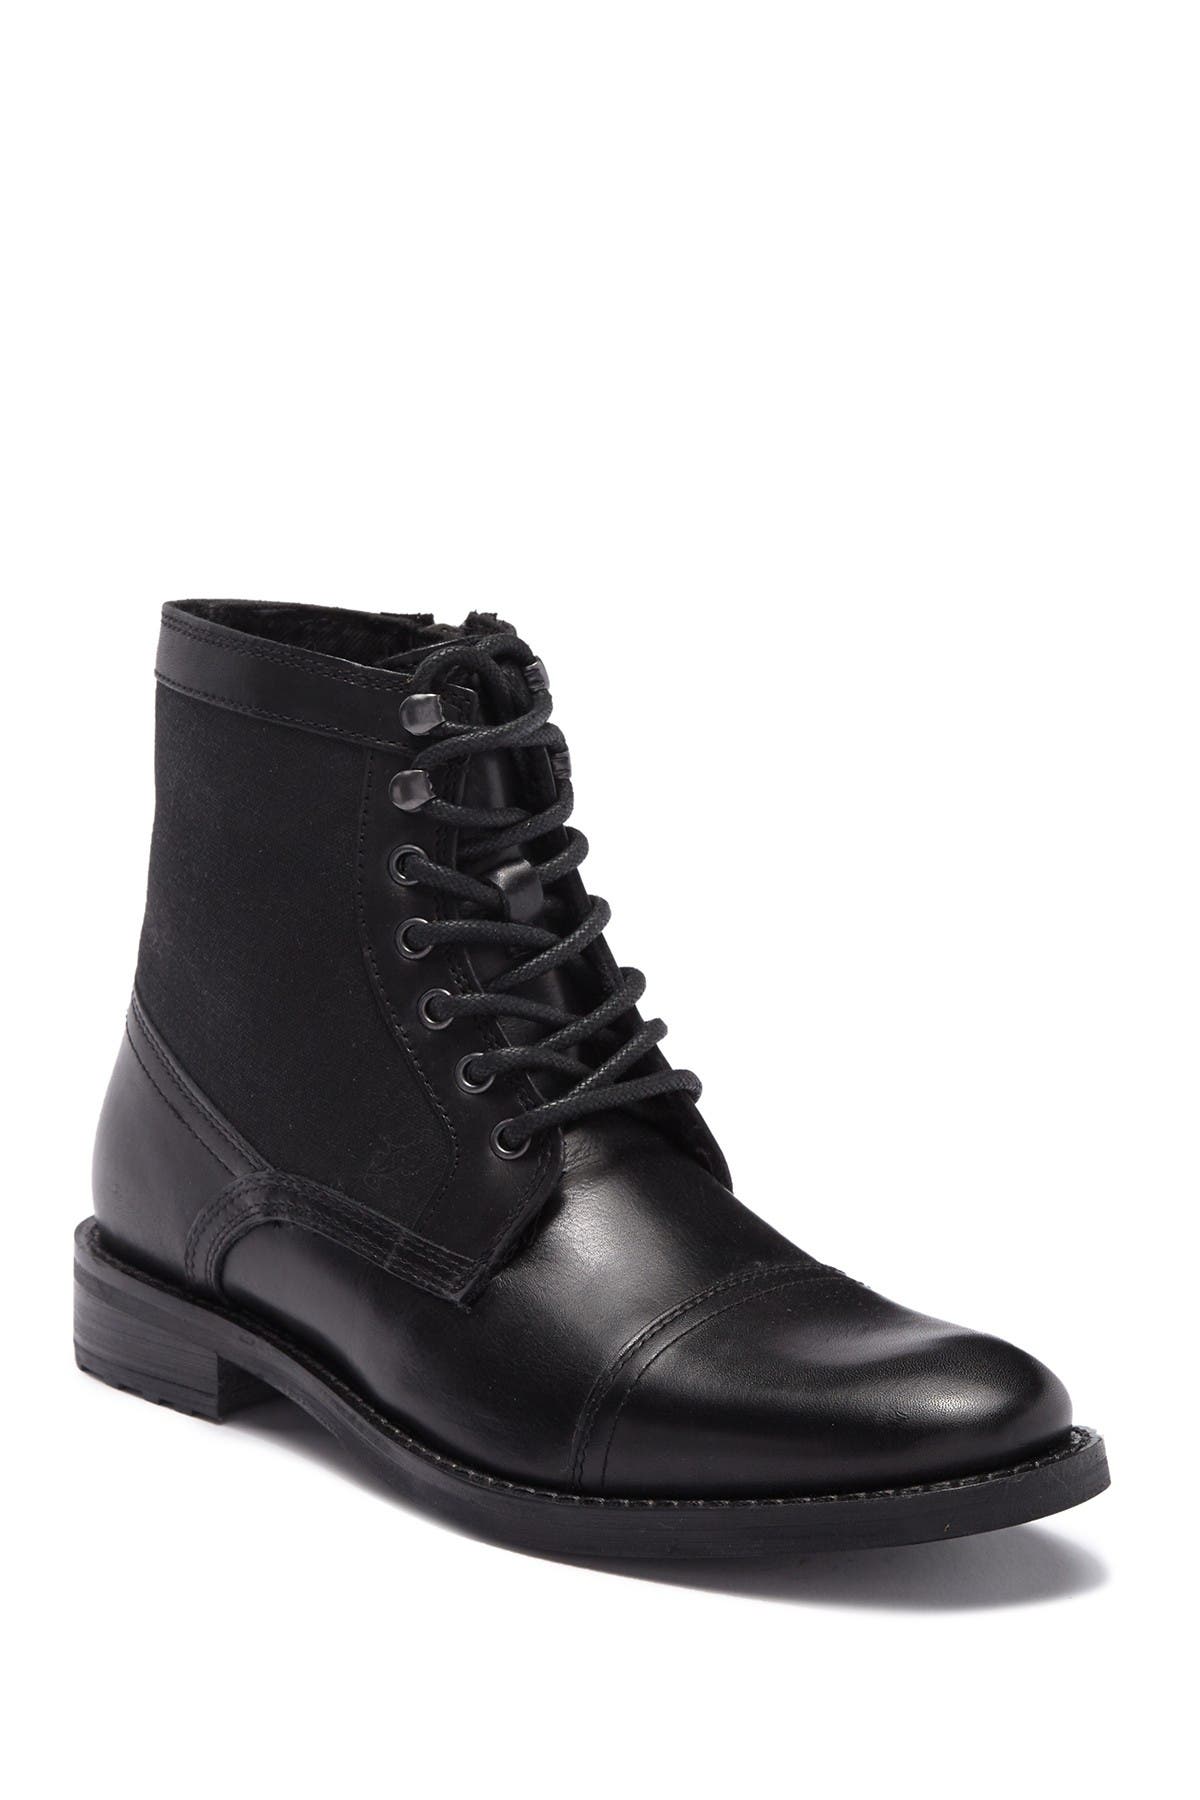 kenneth cole reaction boots sam's club